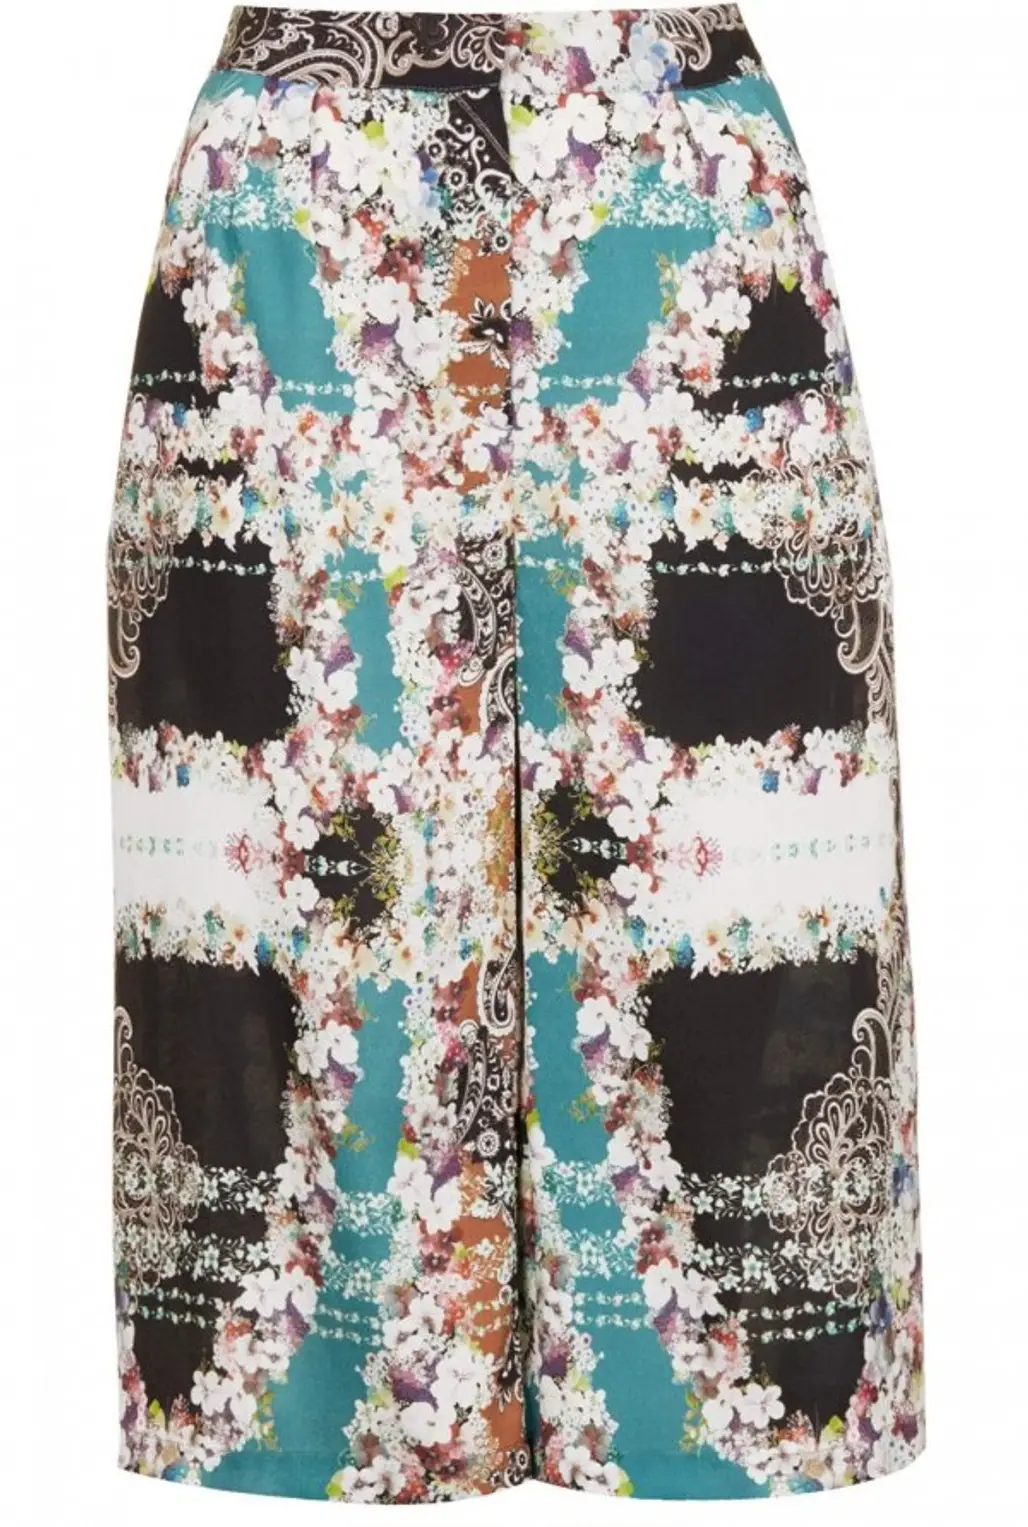 Topshop Intricate Floral Culottes